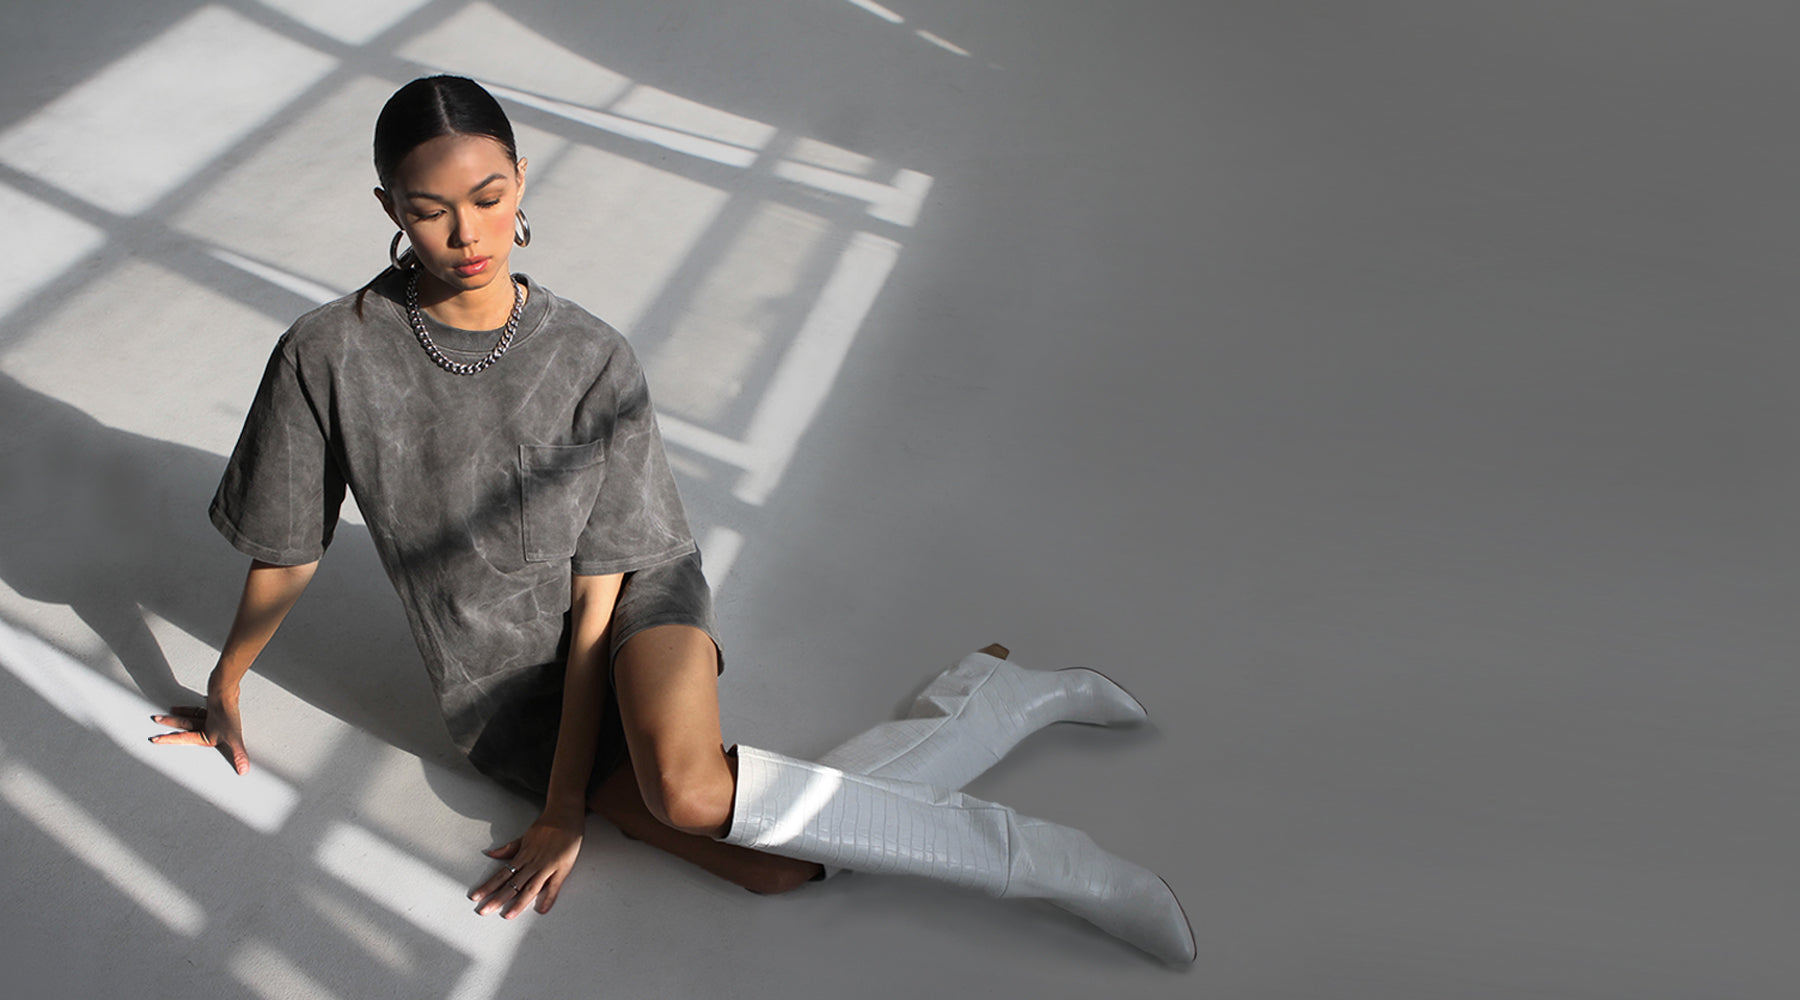 A model sitting on the floor in a partially sunlit room is wearing a vintage washed t-shirt dress with silver hoop earrings, a silver chain link necklace, and a pair of white knee-high boots